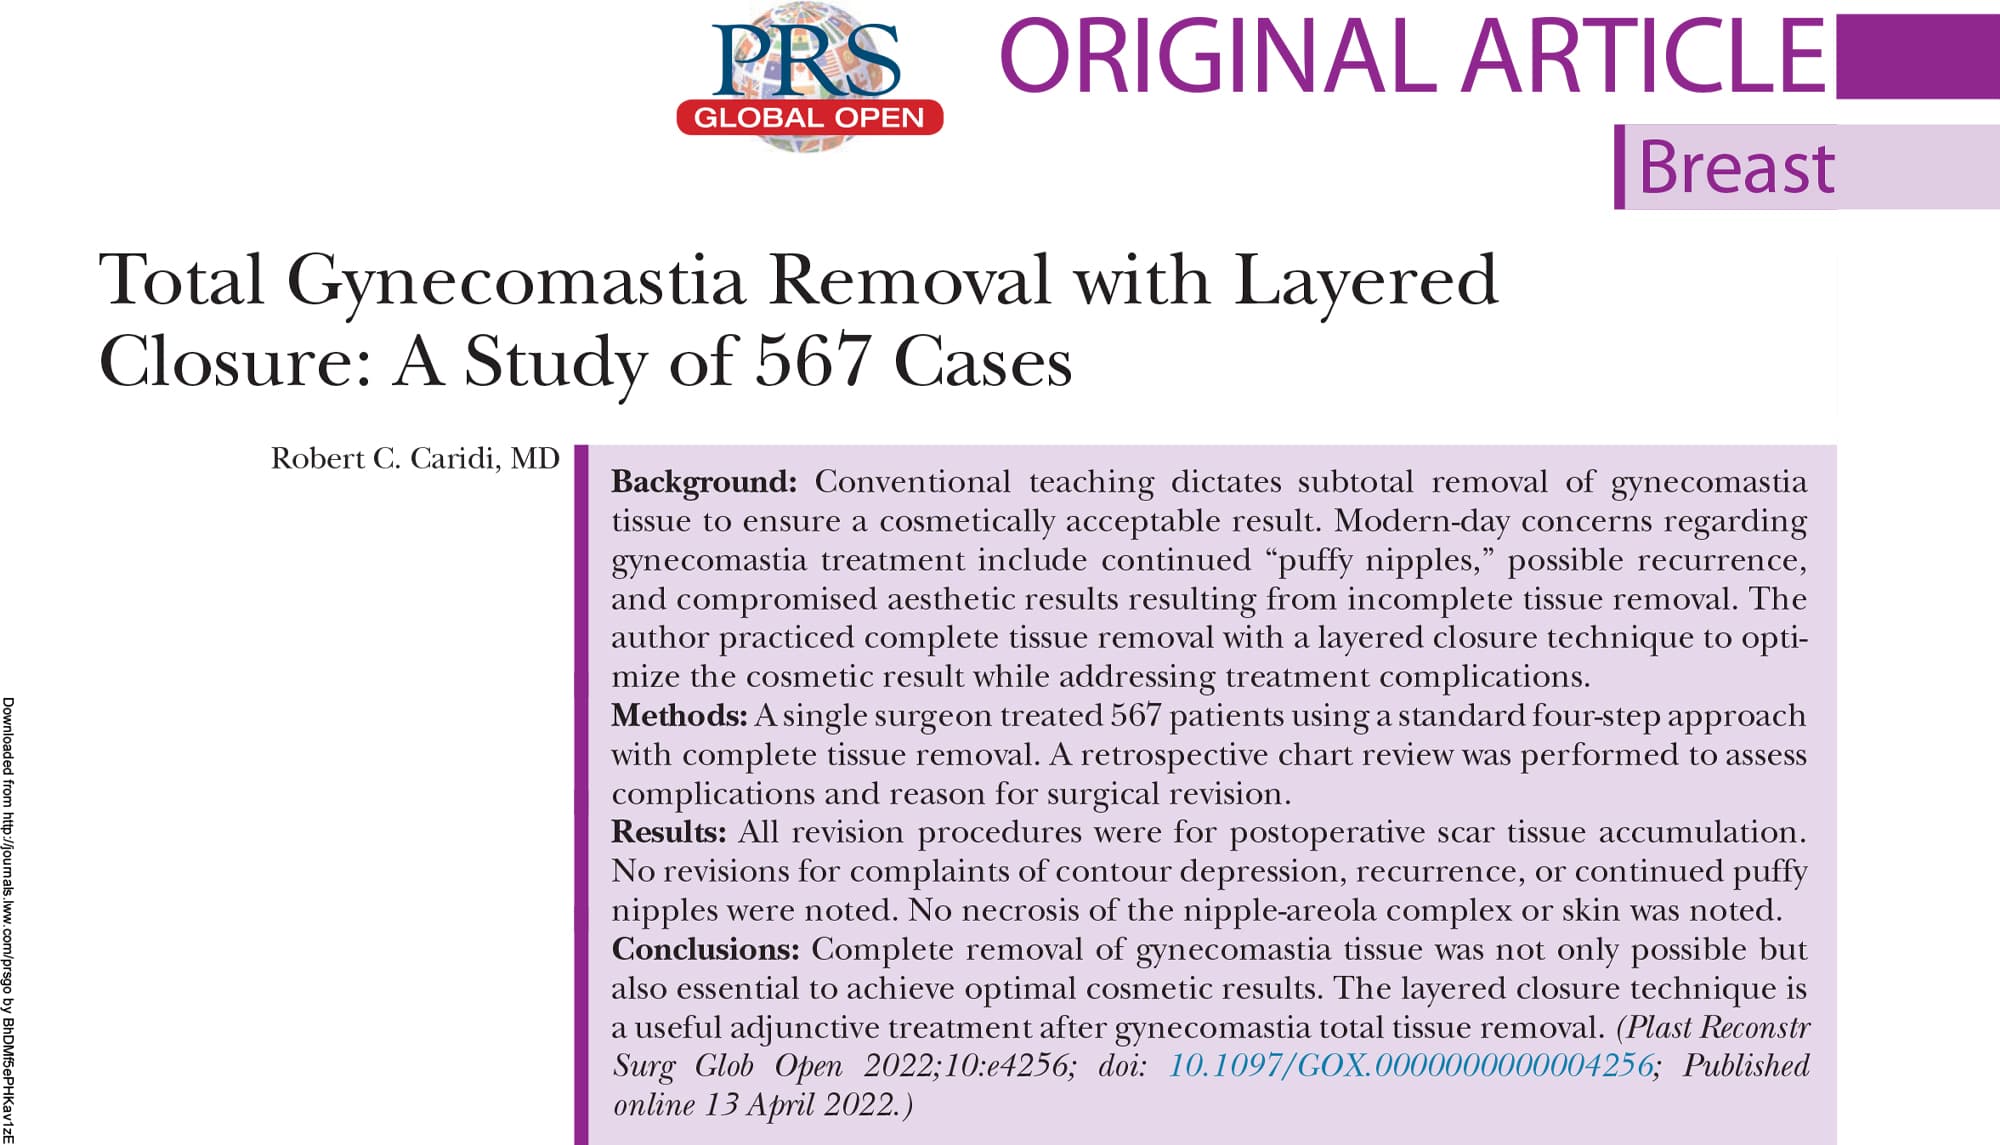 Total Gynecomastia Removal with Layered Closure: A Case Study of 567 Cases